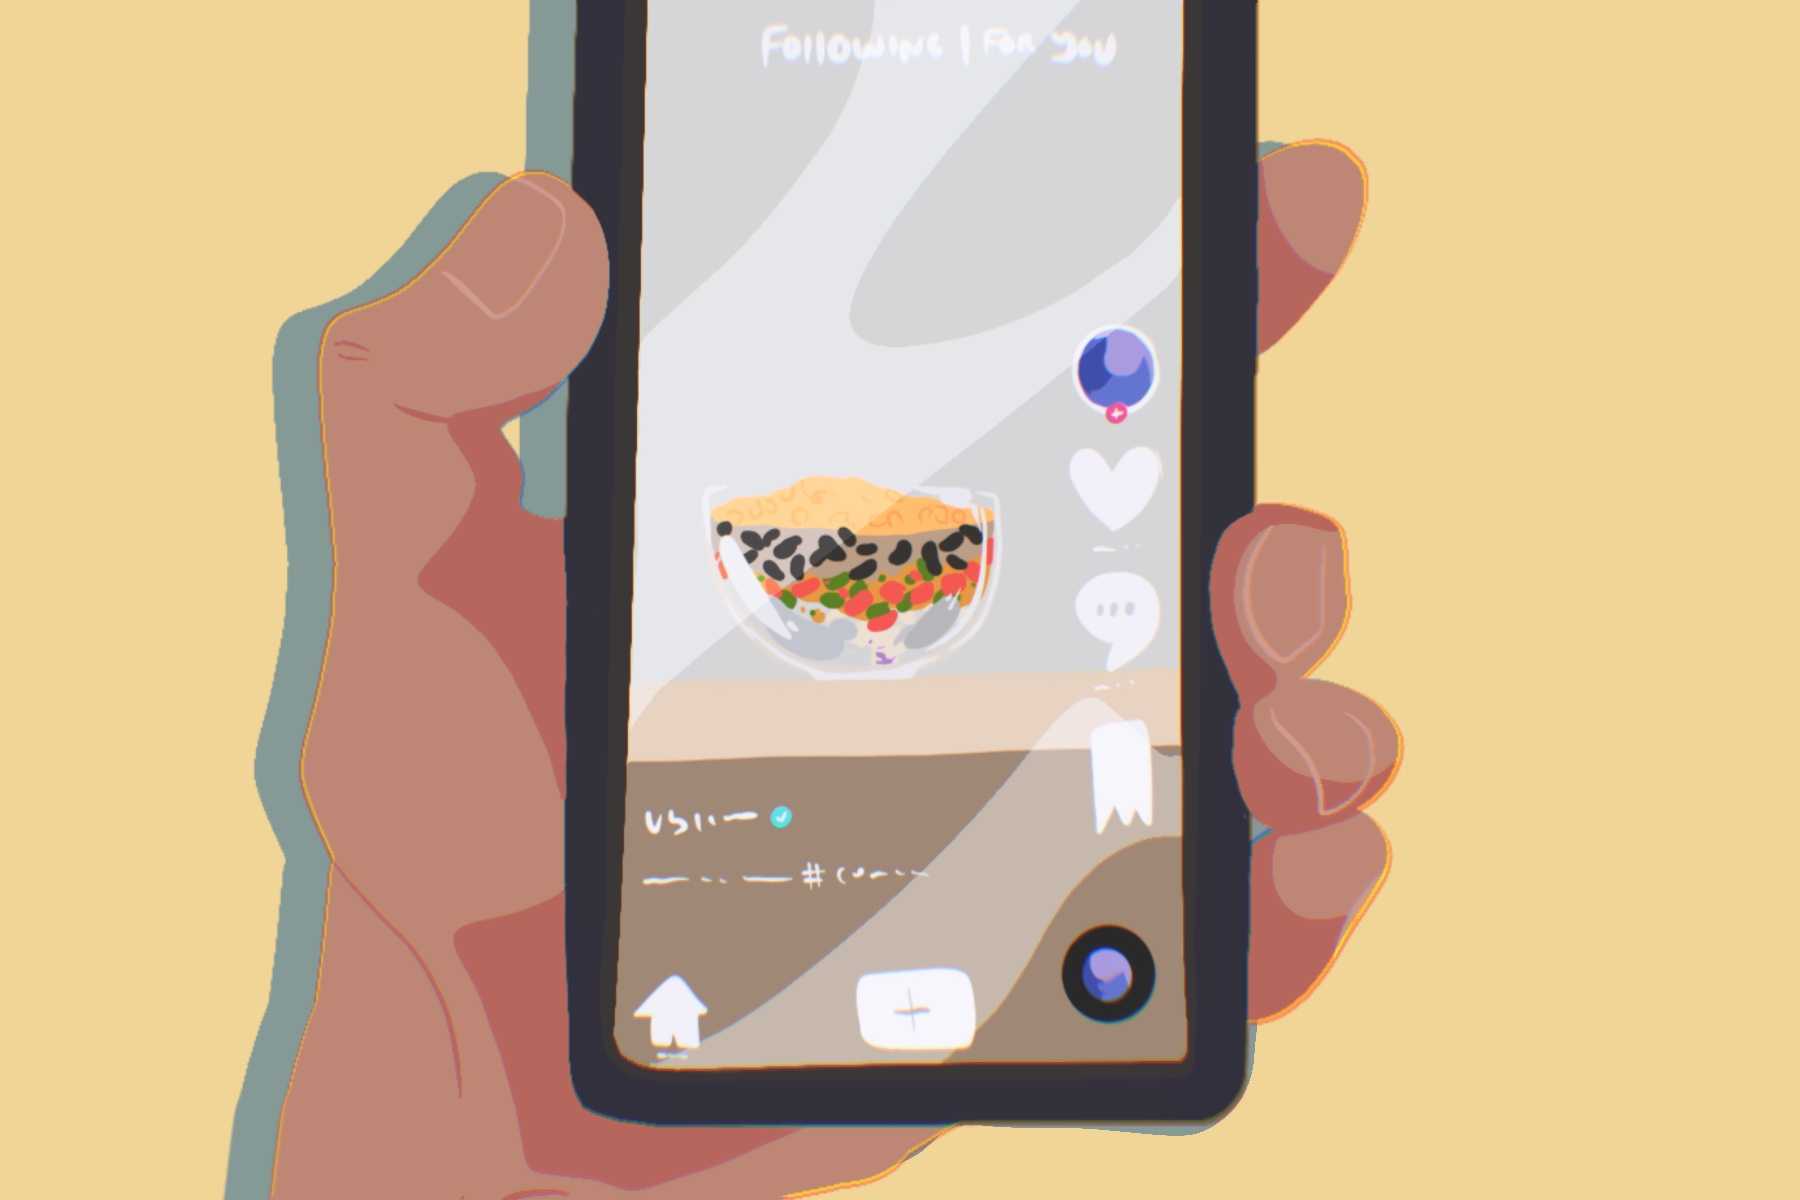 A drawing of Lemirande shows a hand holding a phone with a taco on its screen